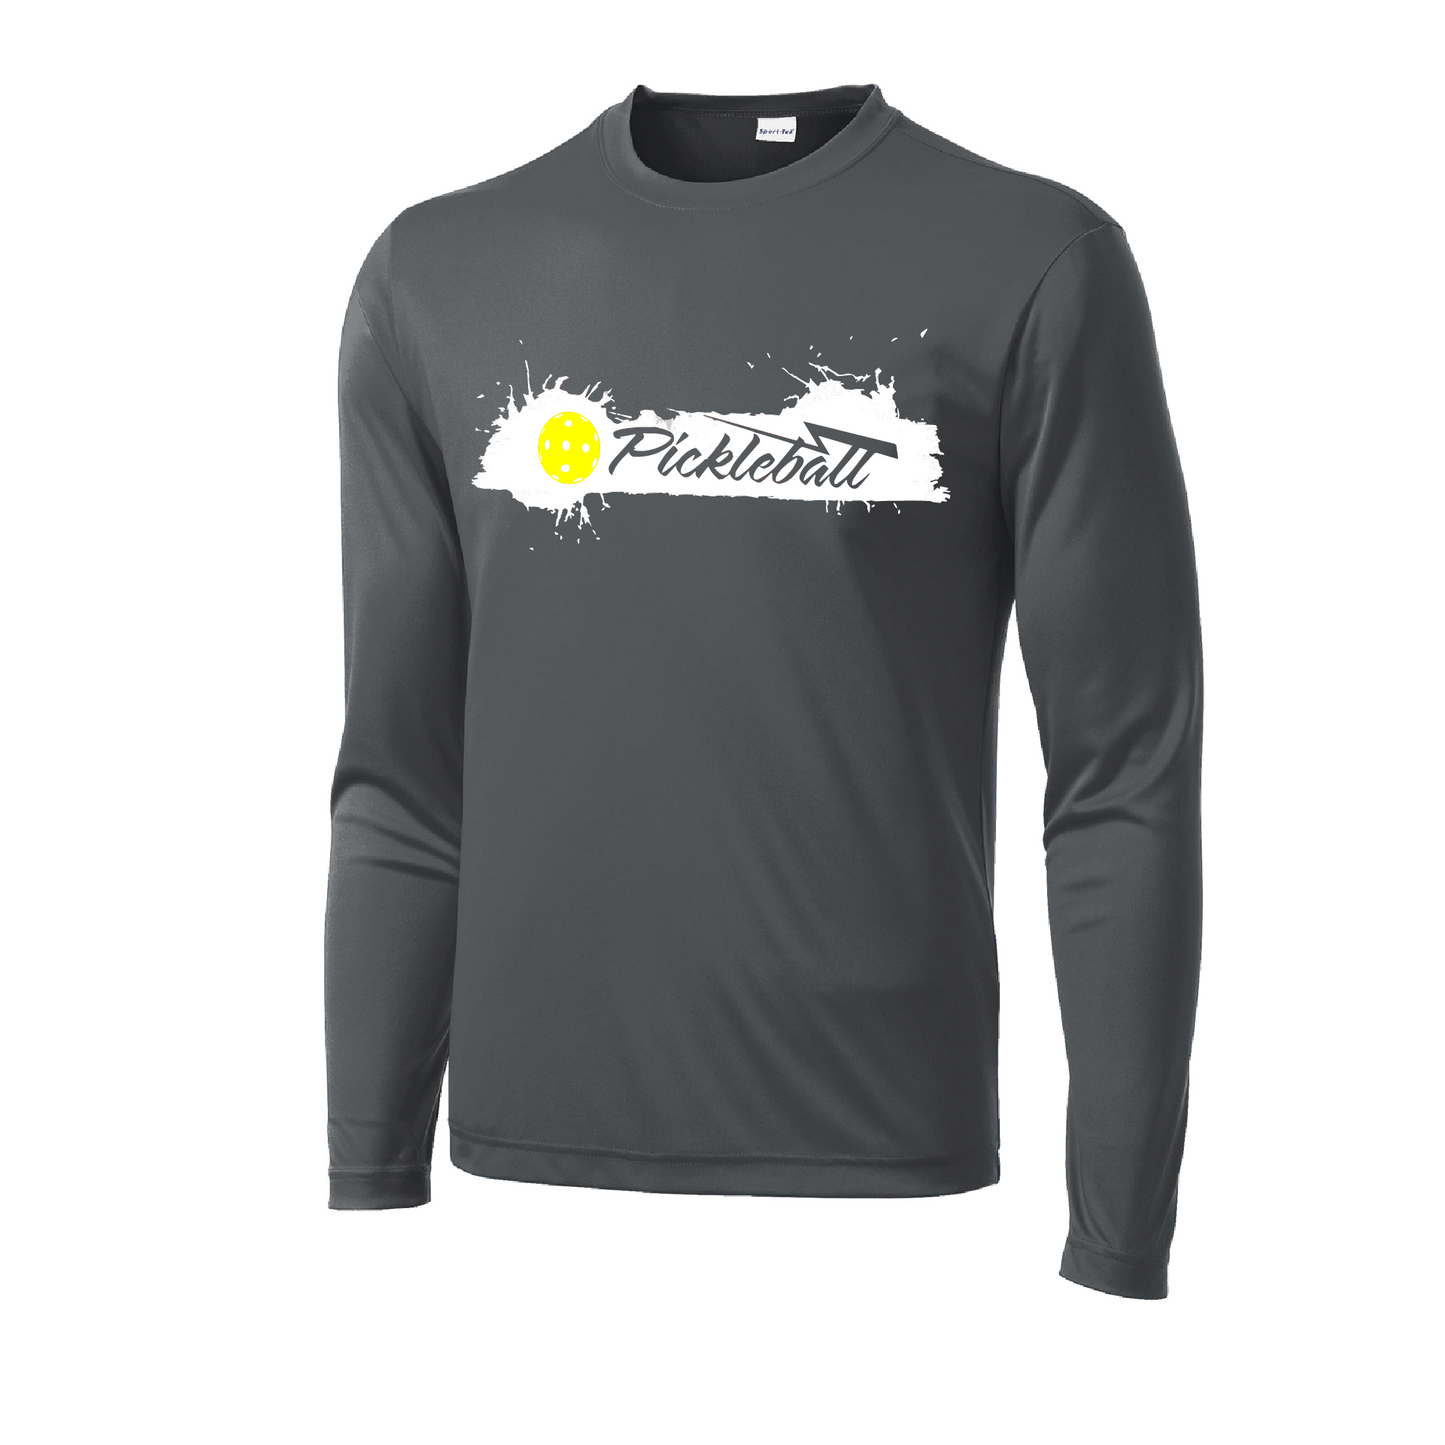 Pickleball Design: Extreme  Men's Style: Long Sleeve  Shirts are lightweight, roomy and highly breathable. These moisture-wicking shirts are designed for athletic performance. They feature PosiCharge technology to lock in color and prevent logos from fading. Removable tag and set-in sleeves for comfort.